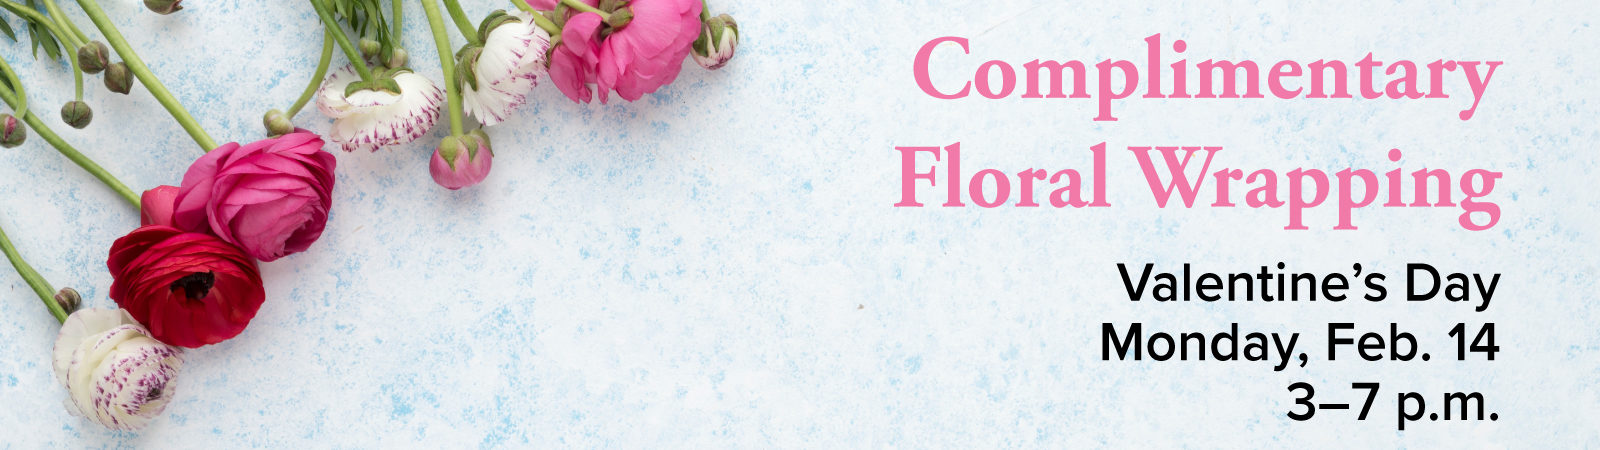 Free floral wrapping from 3-7 pm on February 14th